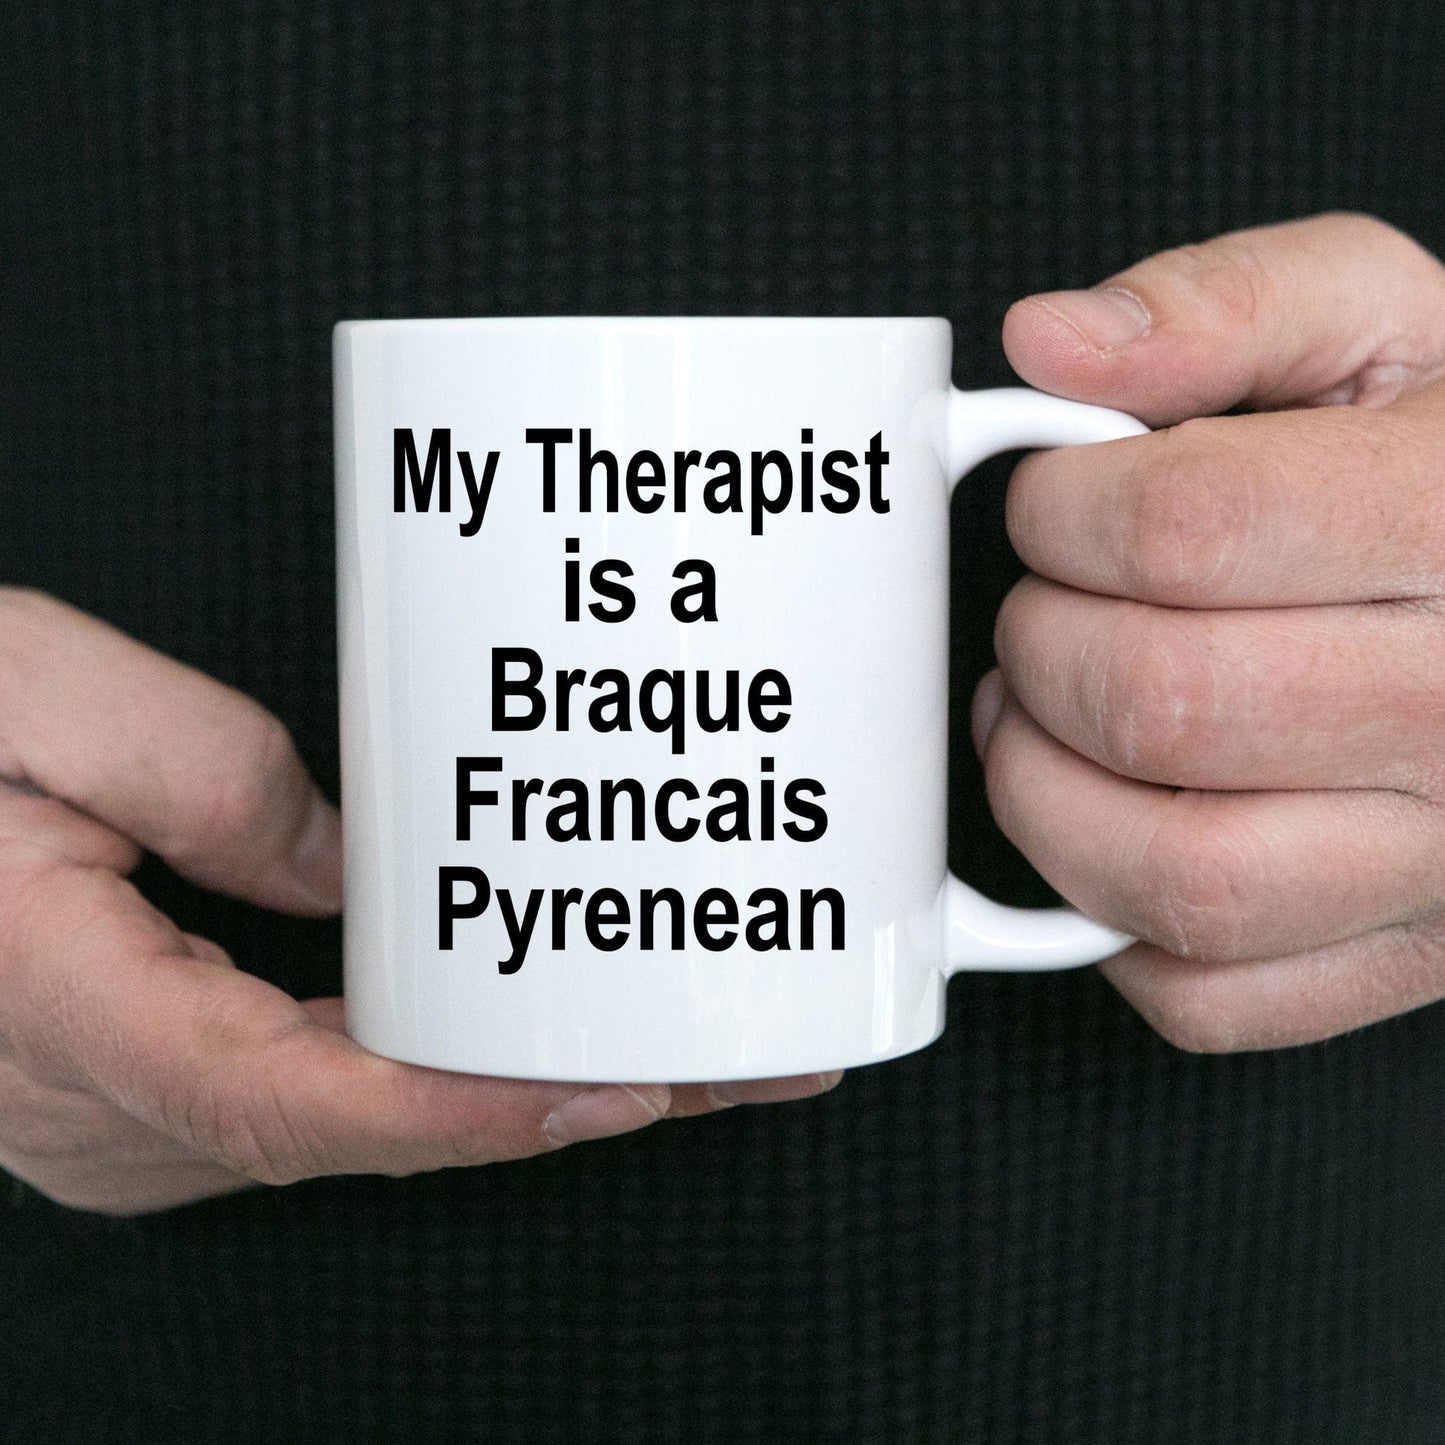 Braque Francais Pyrenean Dog Owner Lover Funny Gift Therapist White Ceramic Coffee Mug